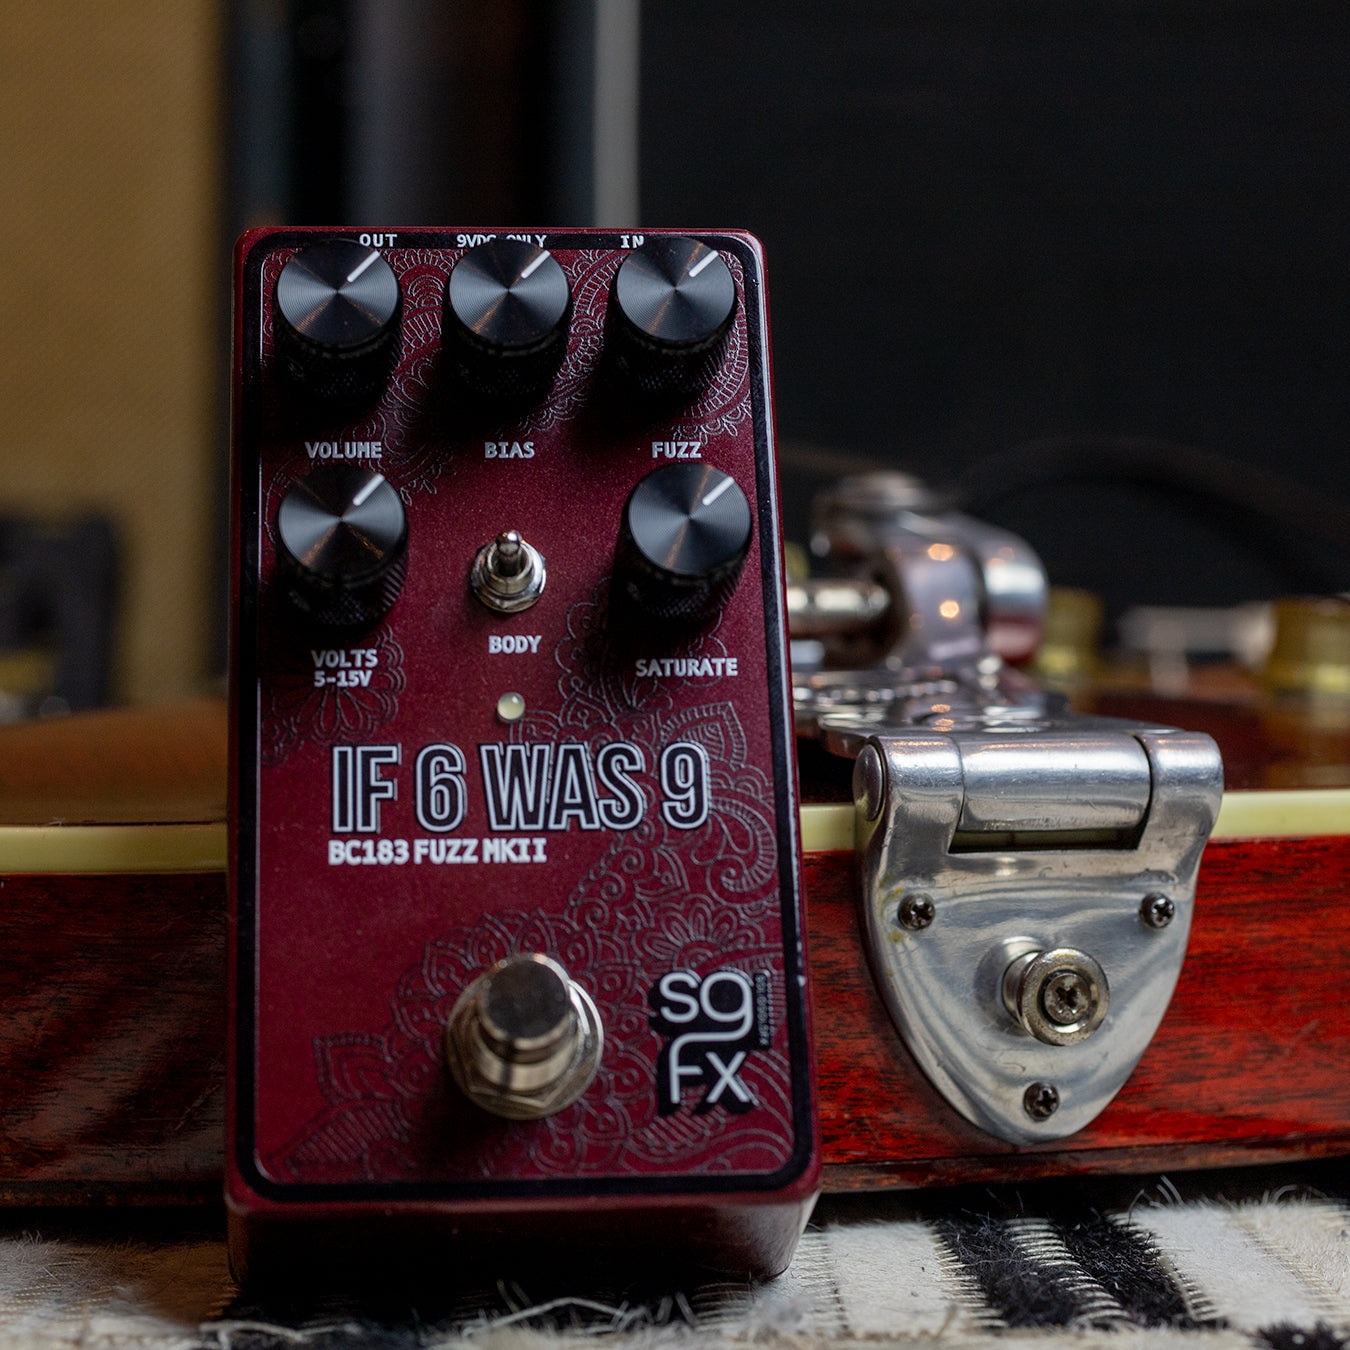 IF 6 WAS 9 - BC183 MKII FUZZ